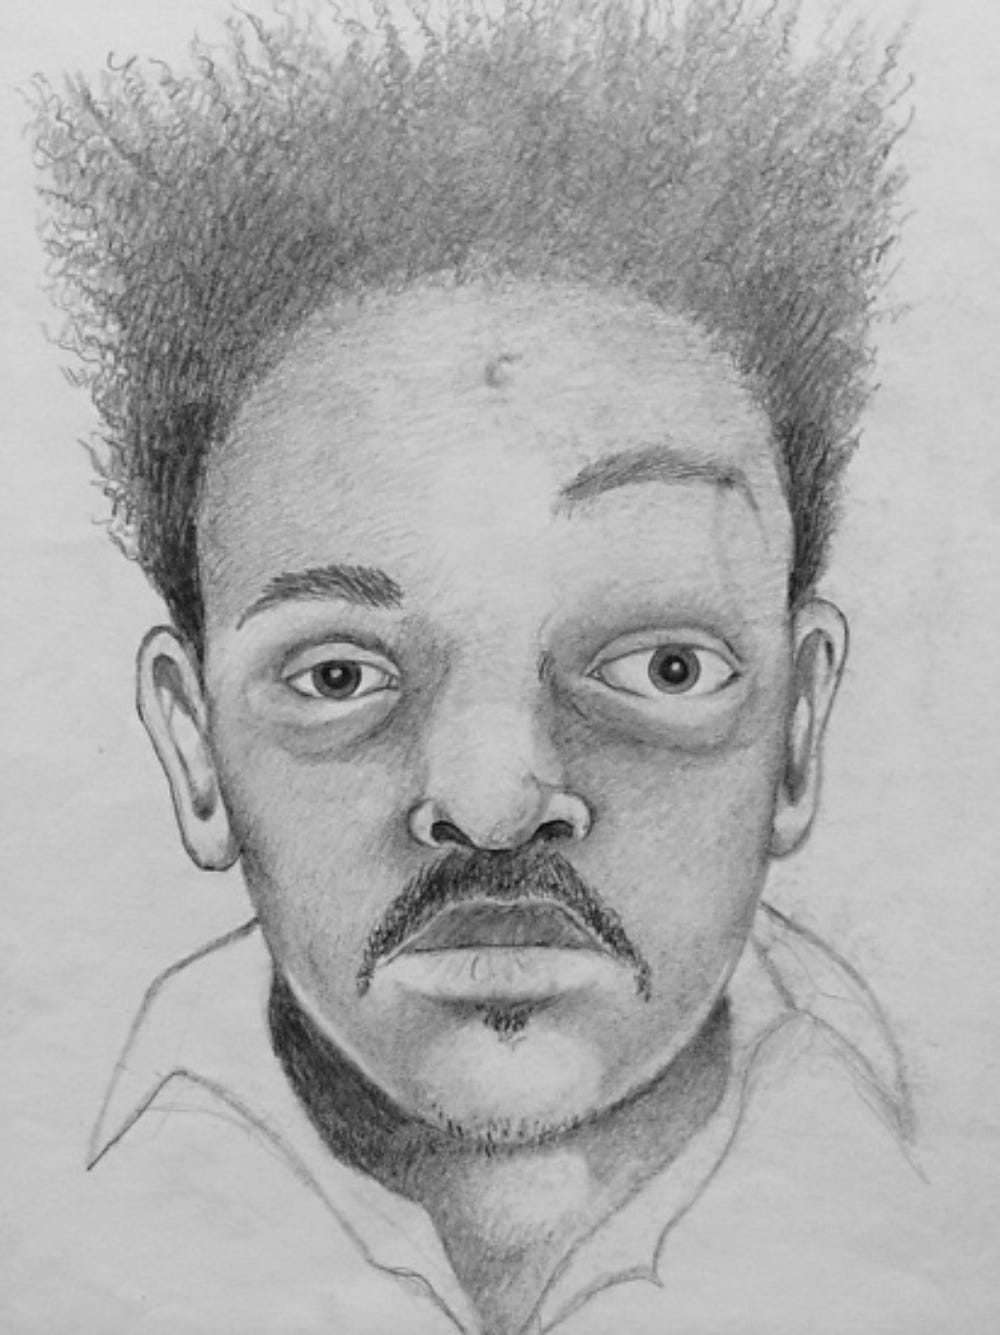 Two Lessons About People From Being a Police Sketch Artist | by John P.  Weiss | Personal Growth | Medium